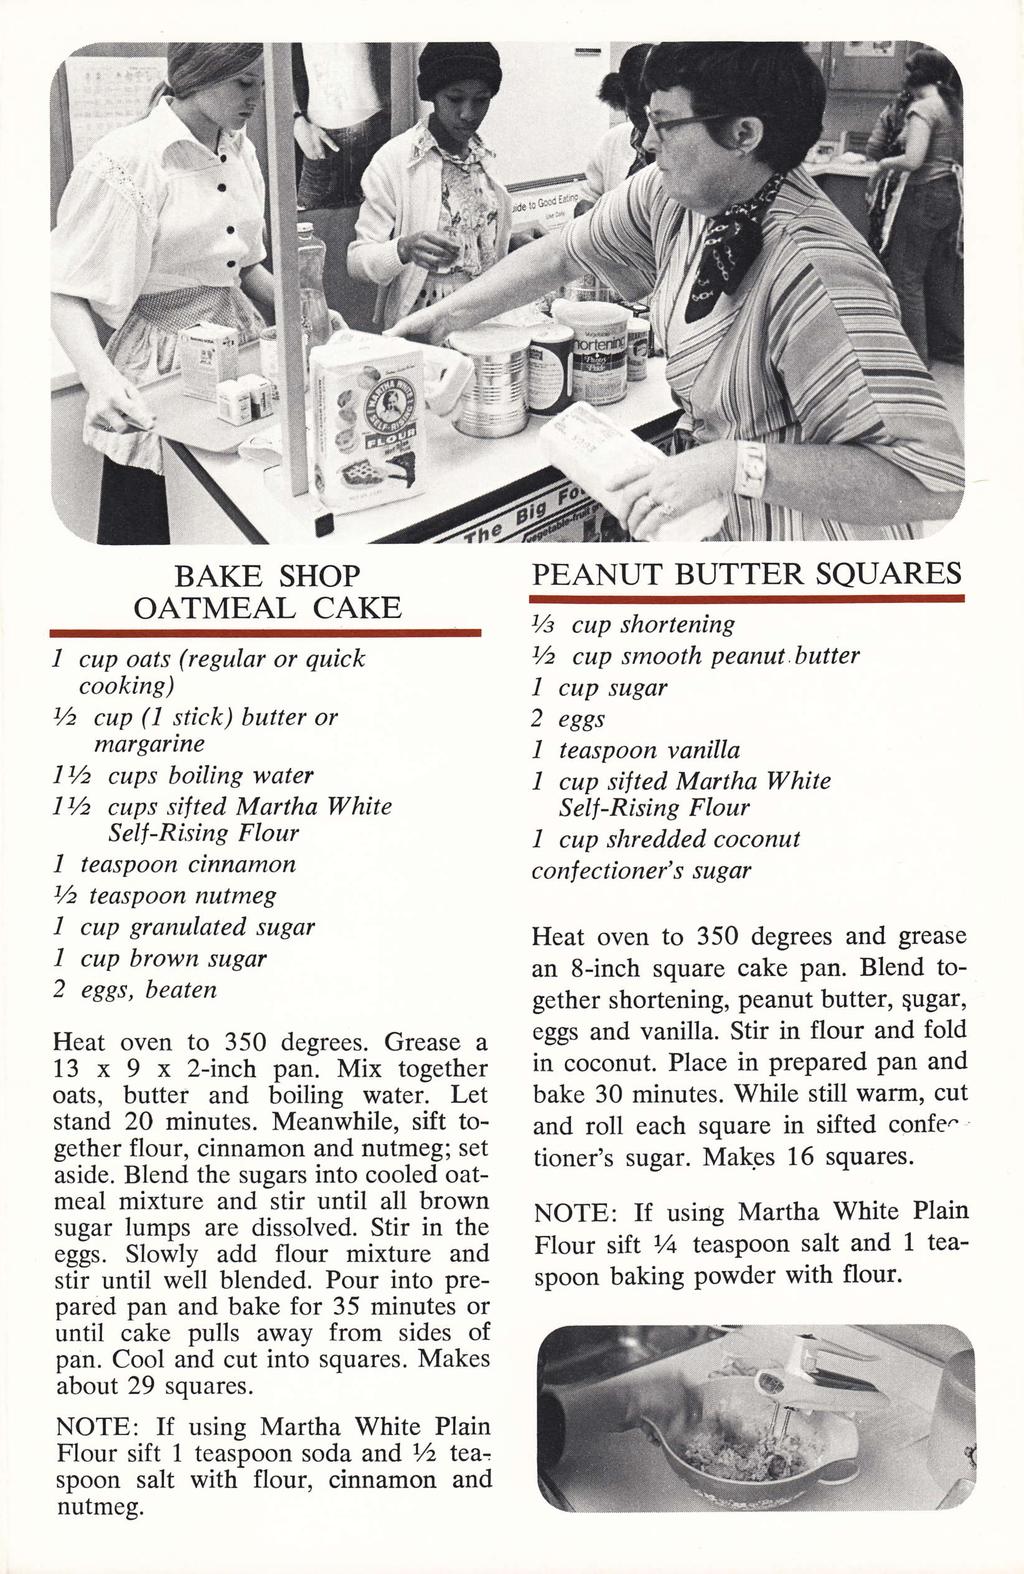 *' t*, a BAKE SHOP OATMEAL CAKE 1 cup oats (regular or quick cooking) /z cup (1 stick) butter or margarine 11/z cups boiling water IVz cups sifted Martha White Sell-Ri.